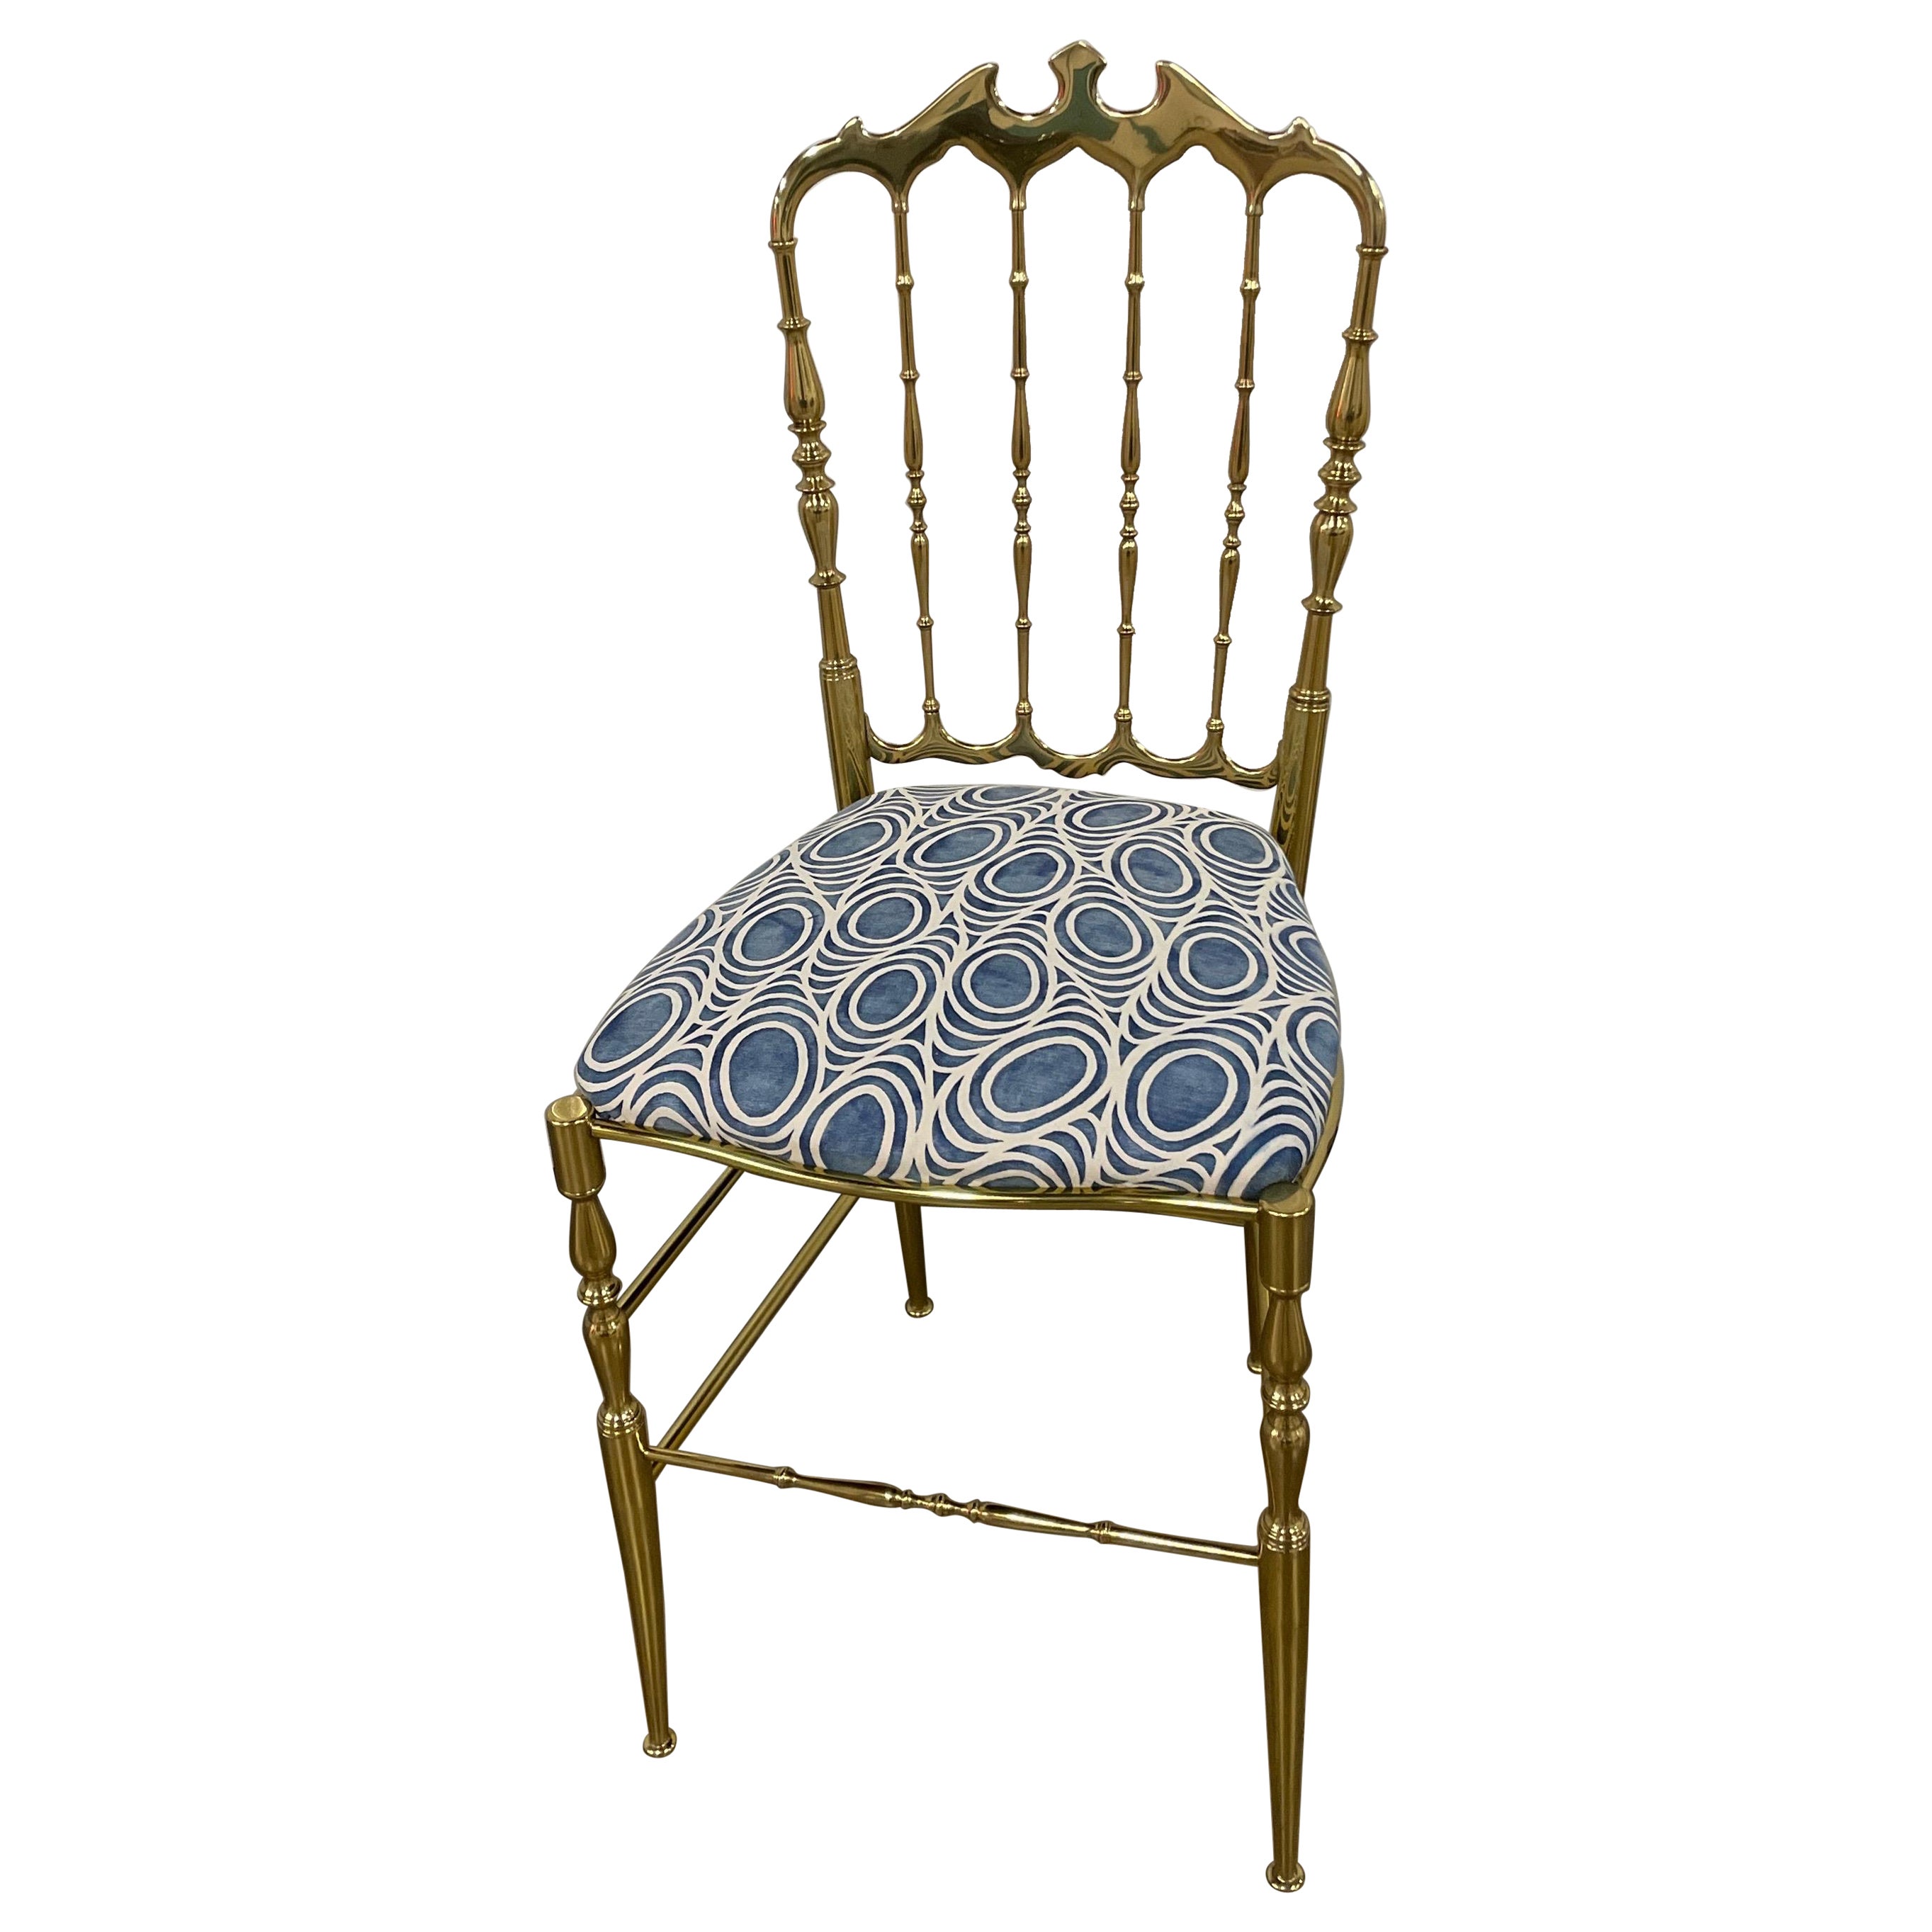 Vintage Solid Brass Italian Chiavari Chair with Fortuny Seat Covering For Sale